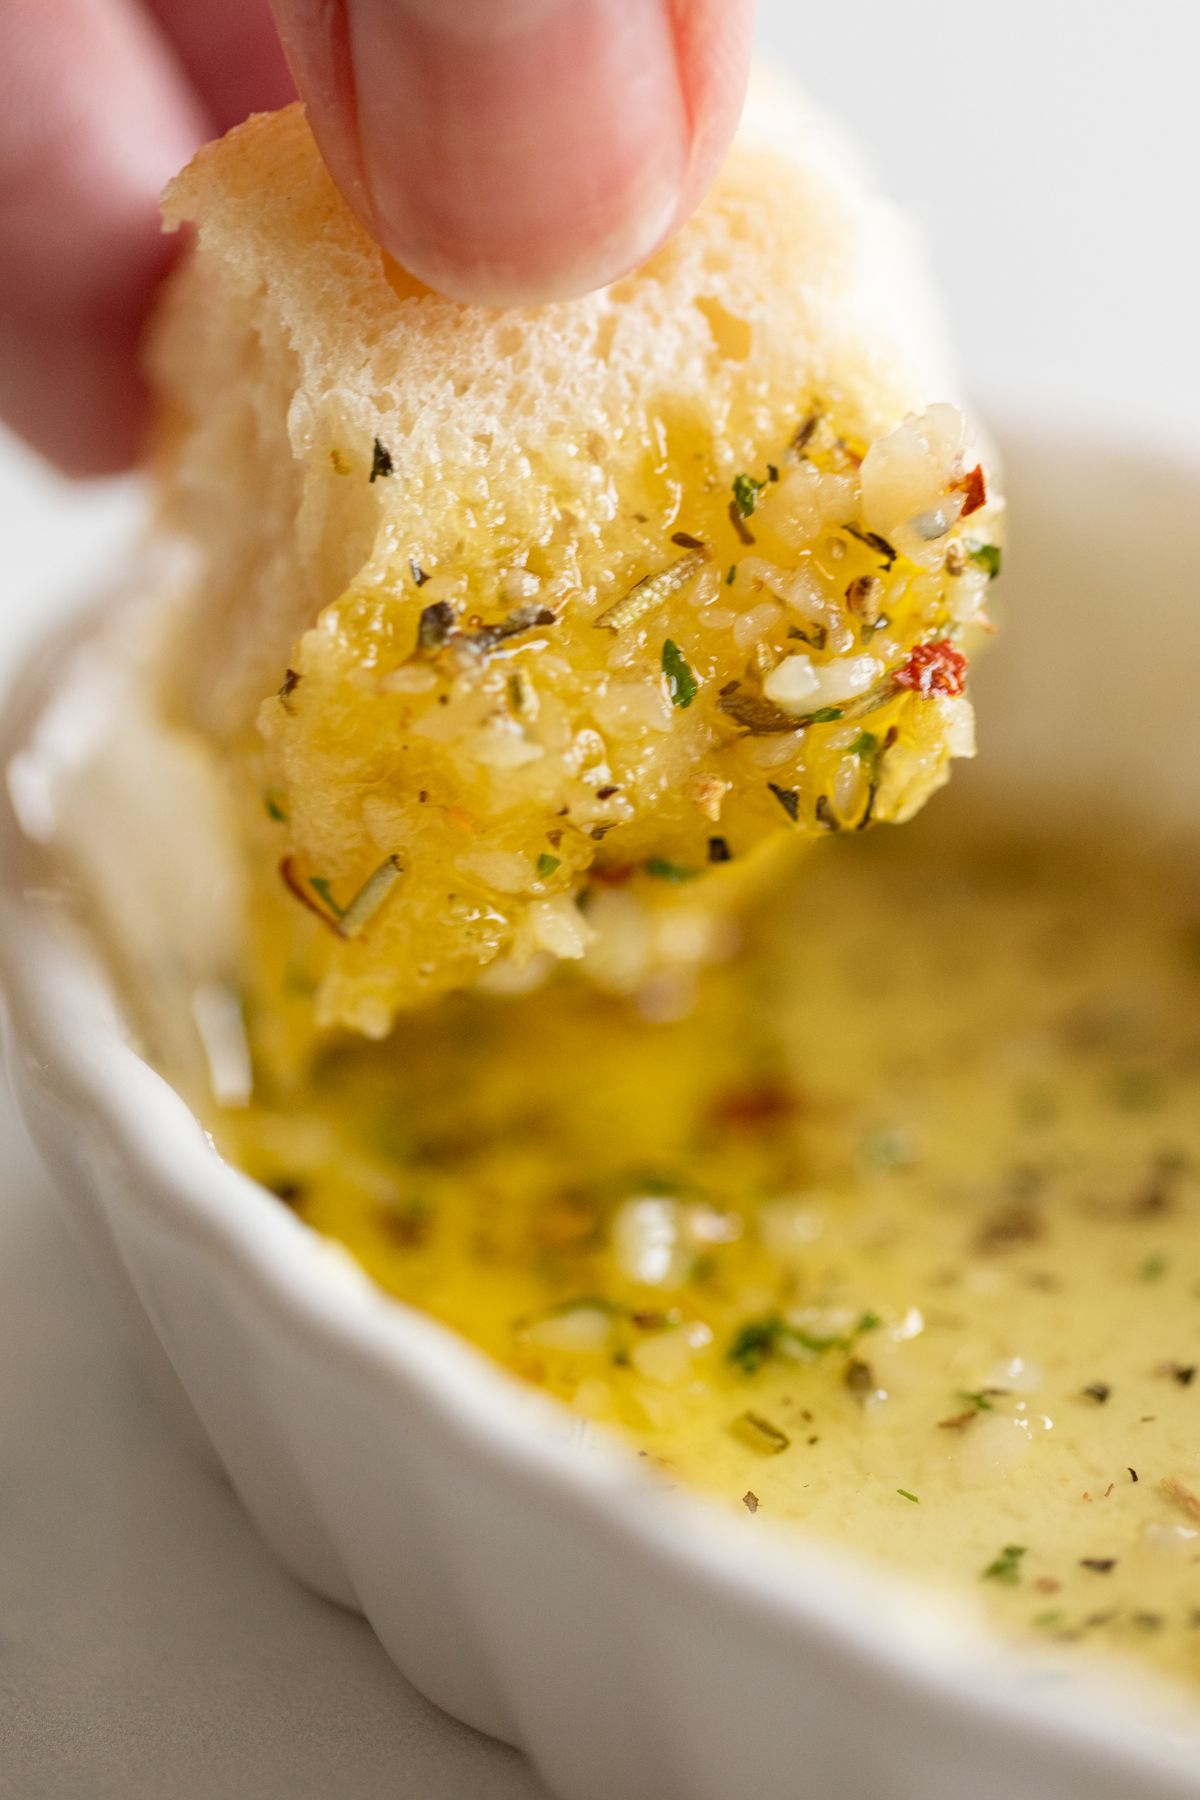 A hand dipping a piece of bread into a white ramekin full of olive oil bread dip.